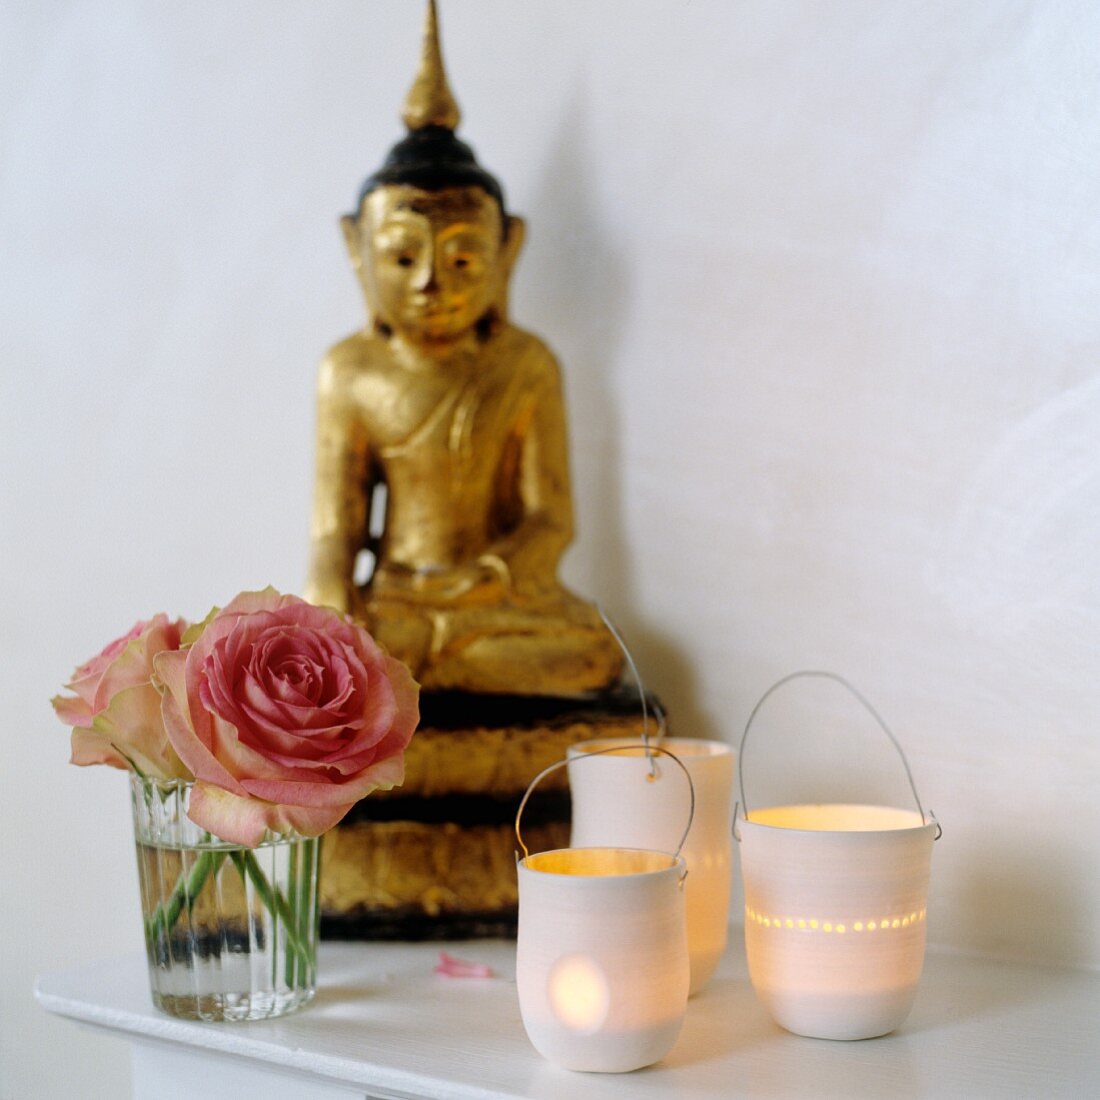 Lit candle lanterns next to roses in glass and gilt Buddha figurine on shelf